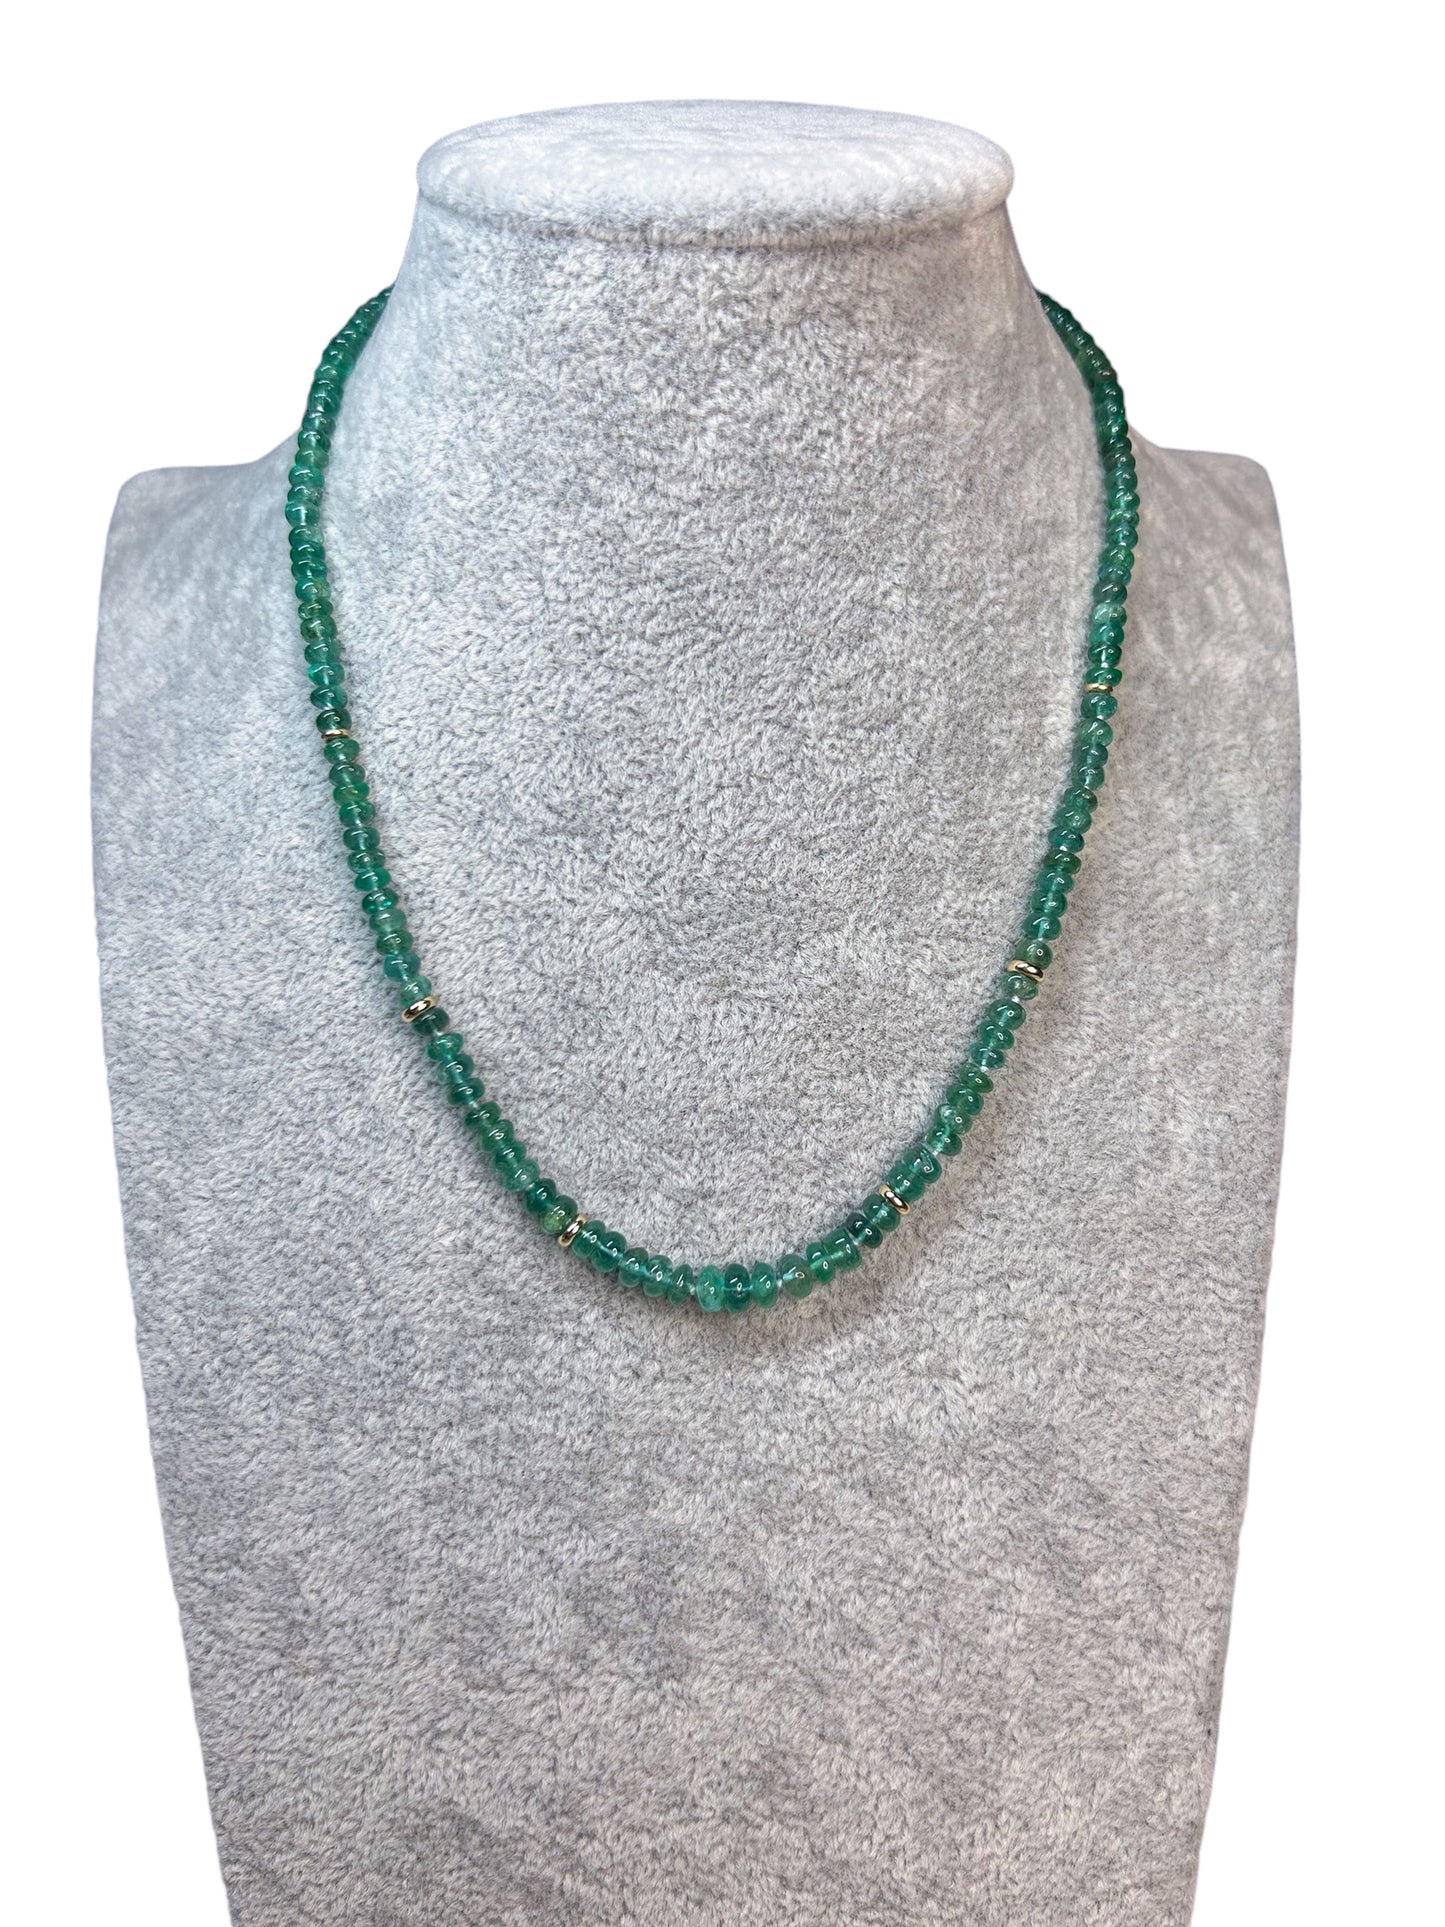 Zambian Emerald Bead Necklace with 14k Solid Gold